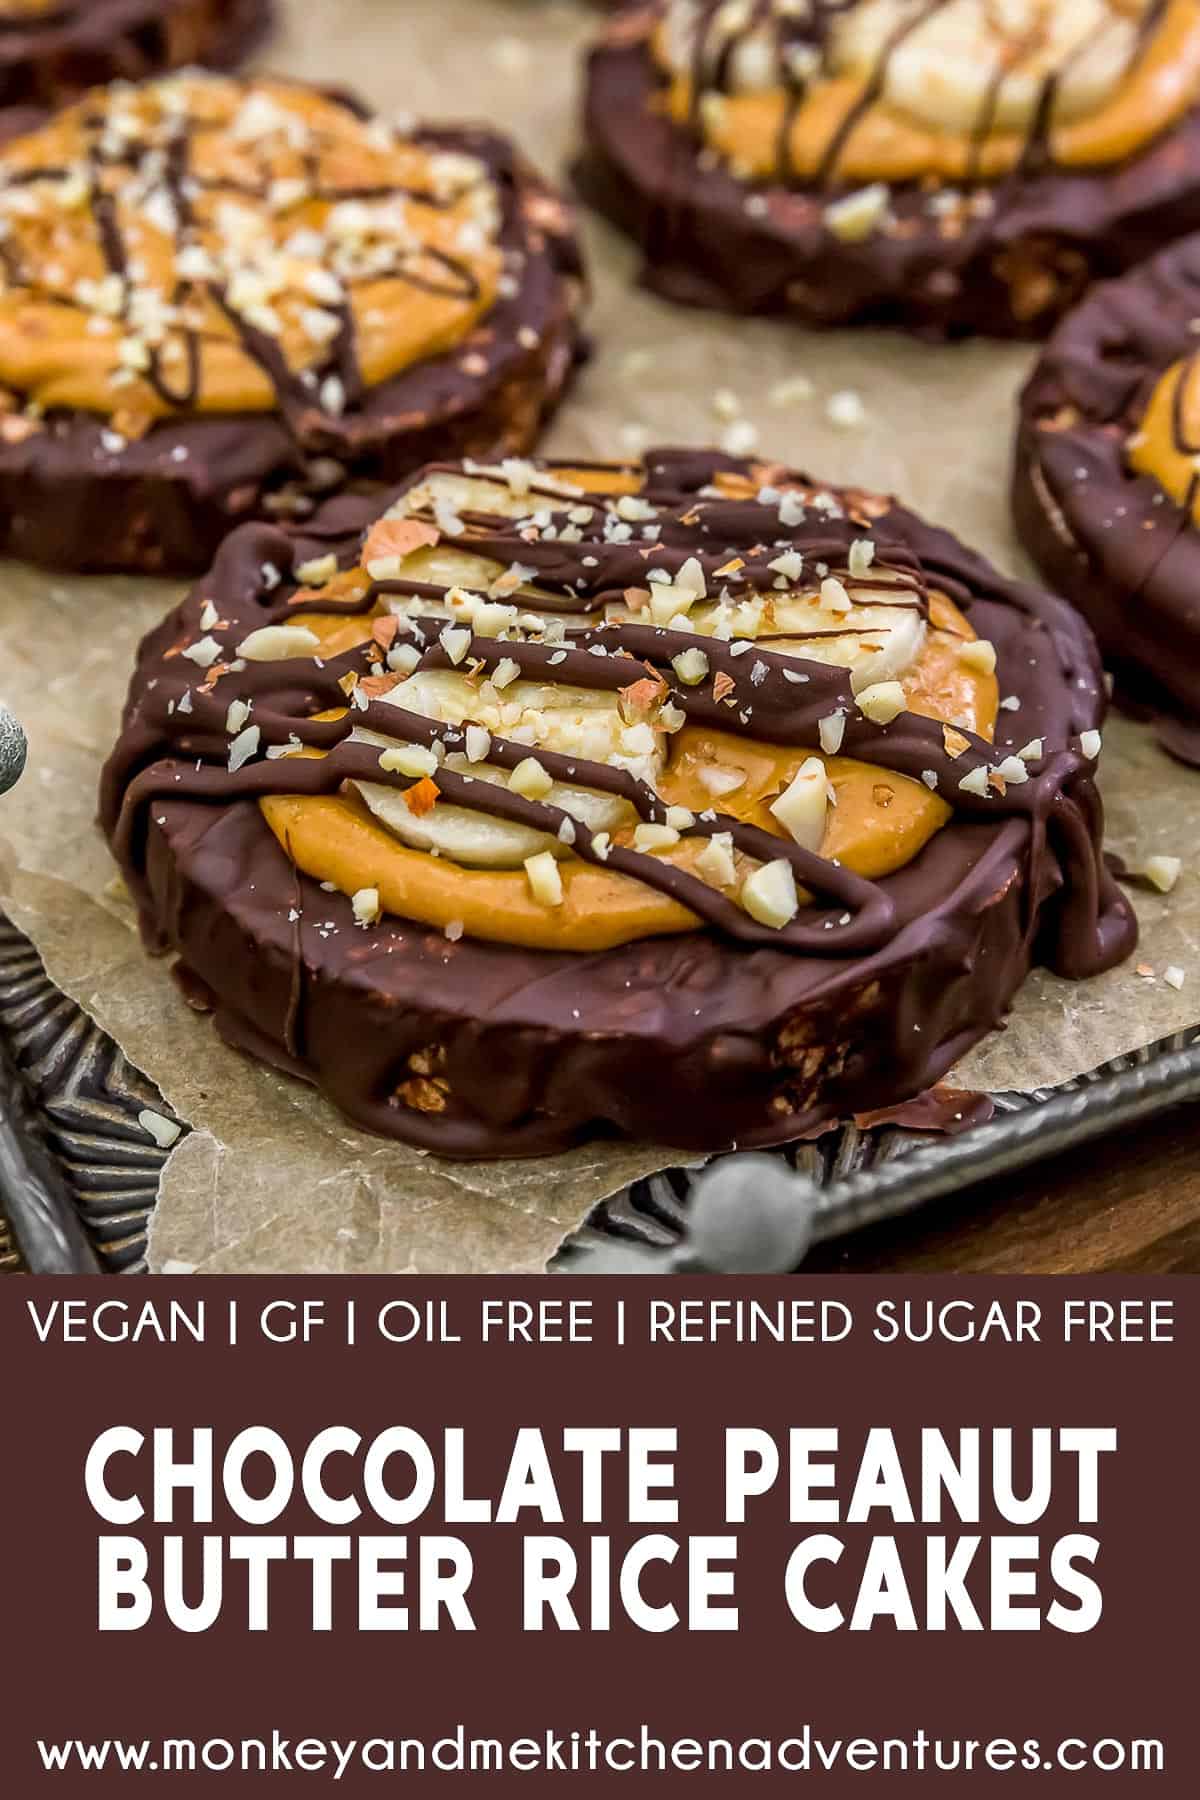 Chocolate Peanut Butter Rice Cakes with text description